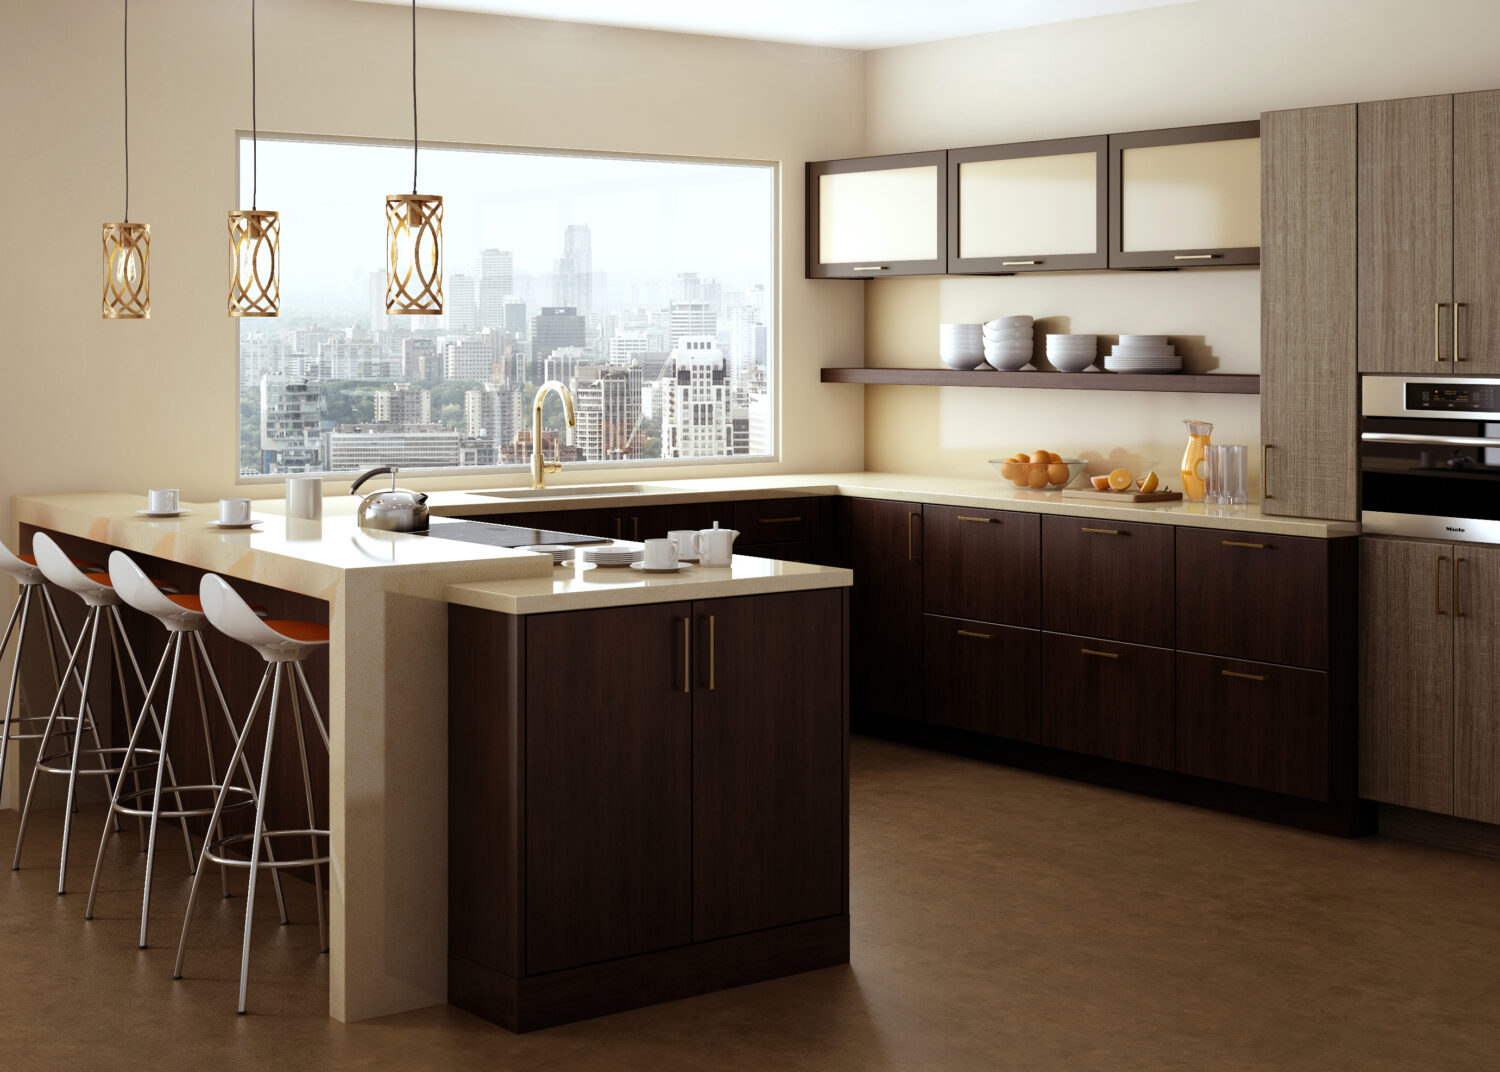 A city loft appartment with a stunning view and modern cabinets in a sleek and contemporary kitchen design. Featuring Dura Supreme frameless cabinets.